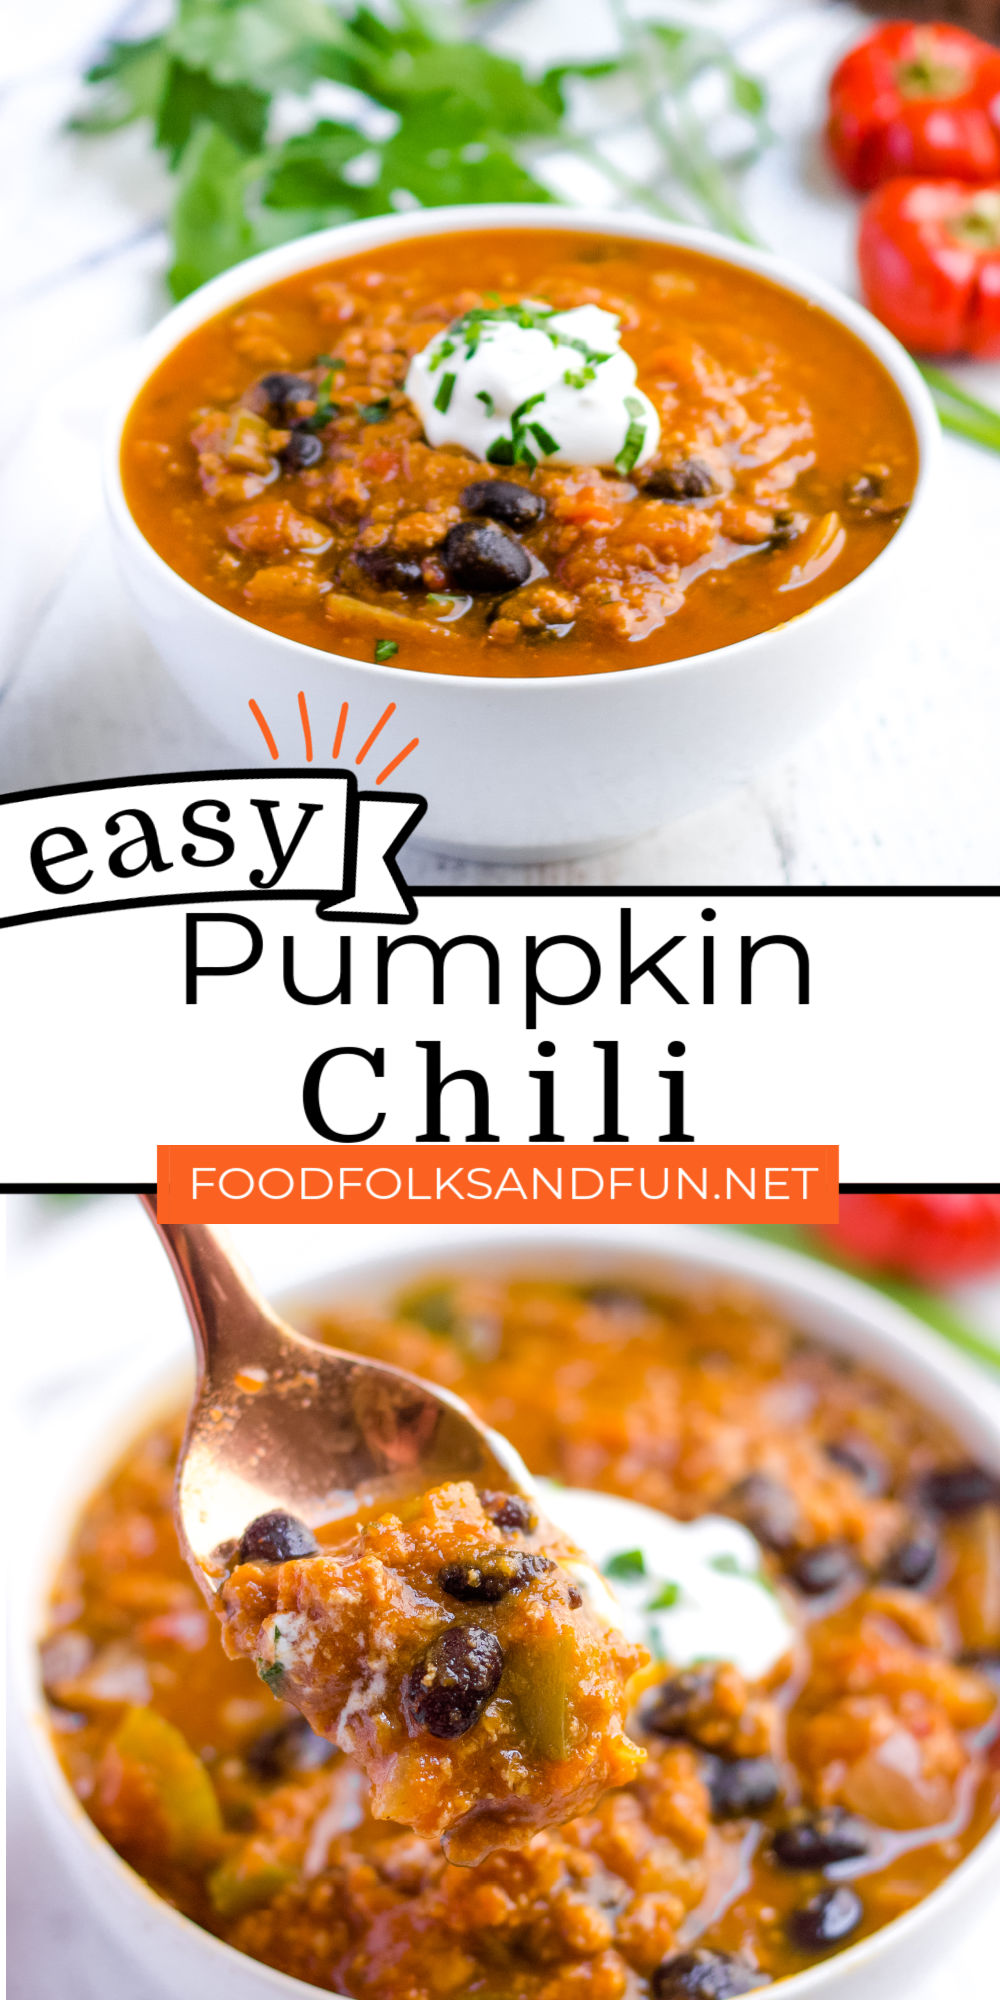 This Pumpkin Chili is the ultimate fall chili recipe. It’s hearty, comforting, and has just a touch of delicious pumpkin flavor. via @foodfolksandfun